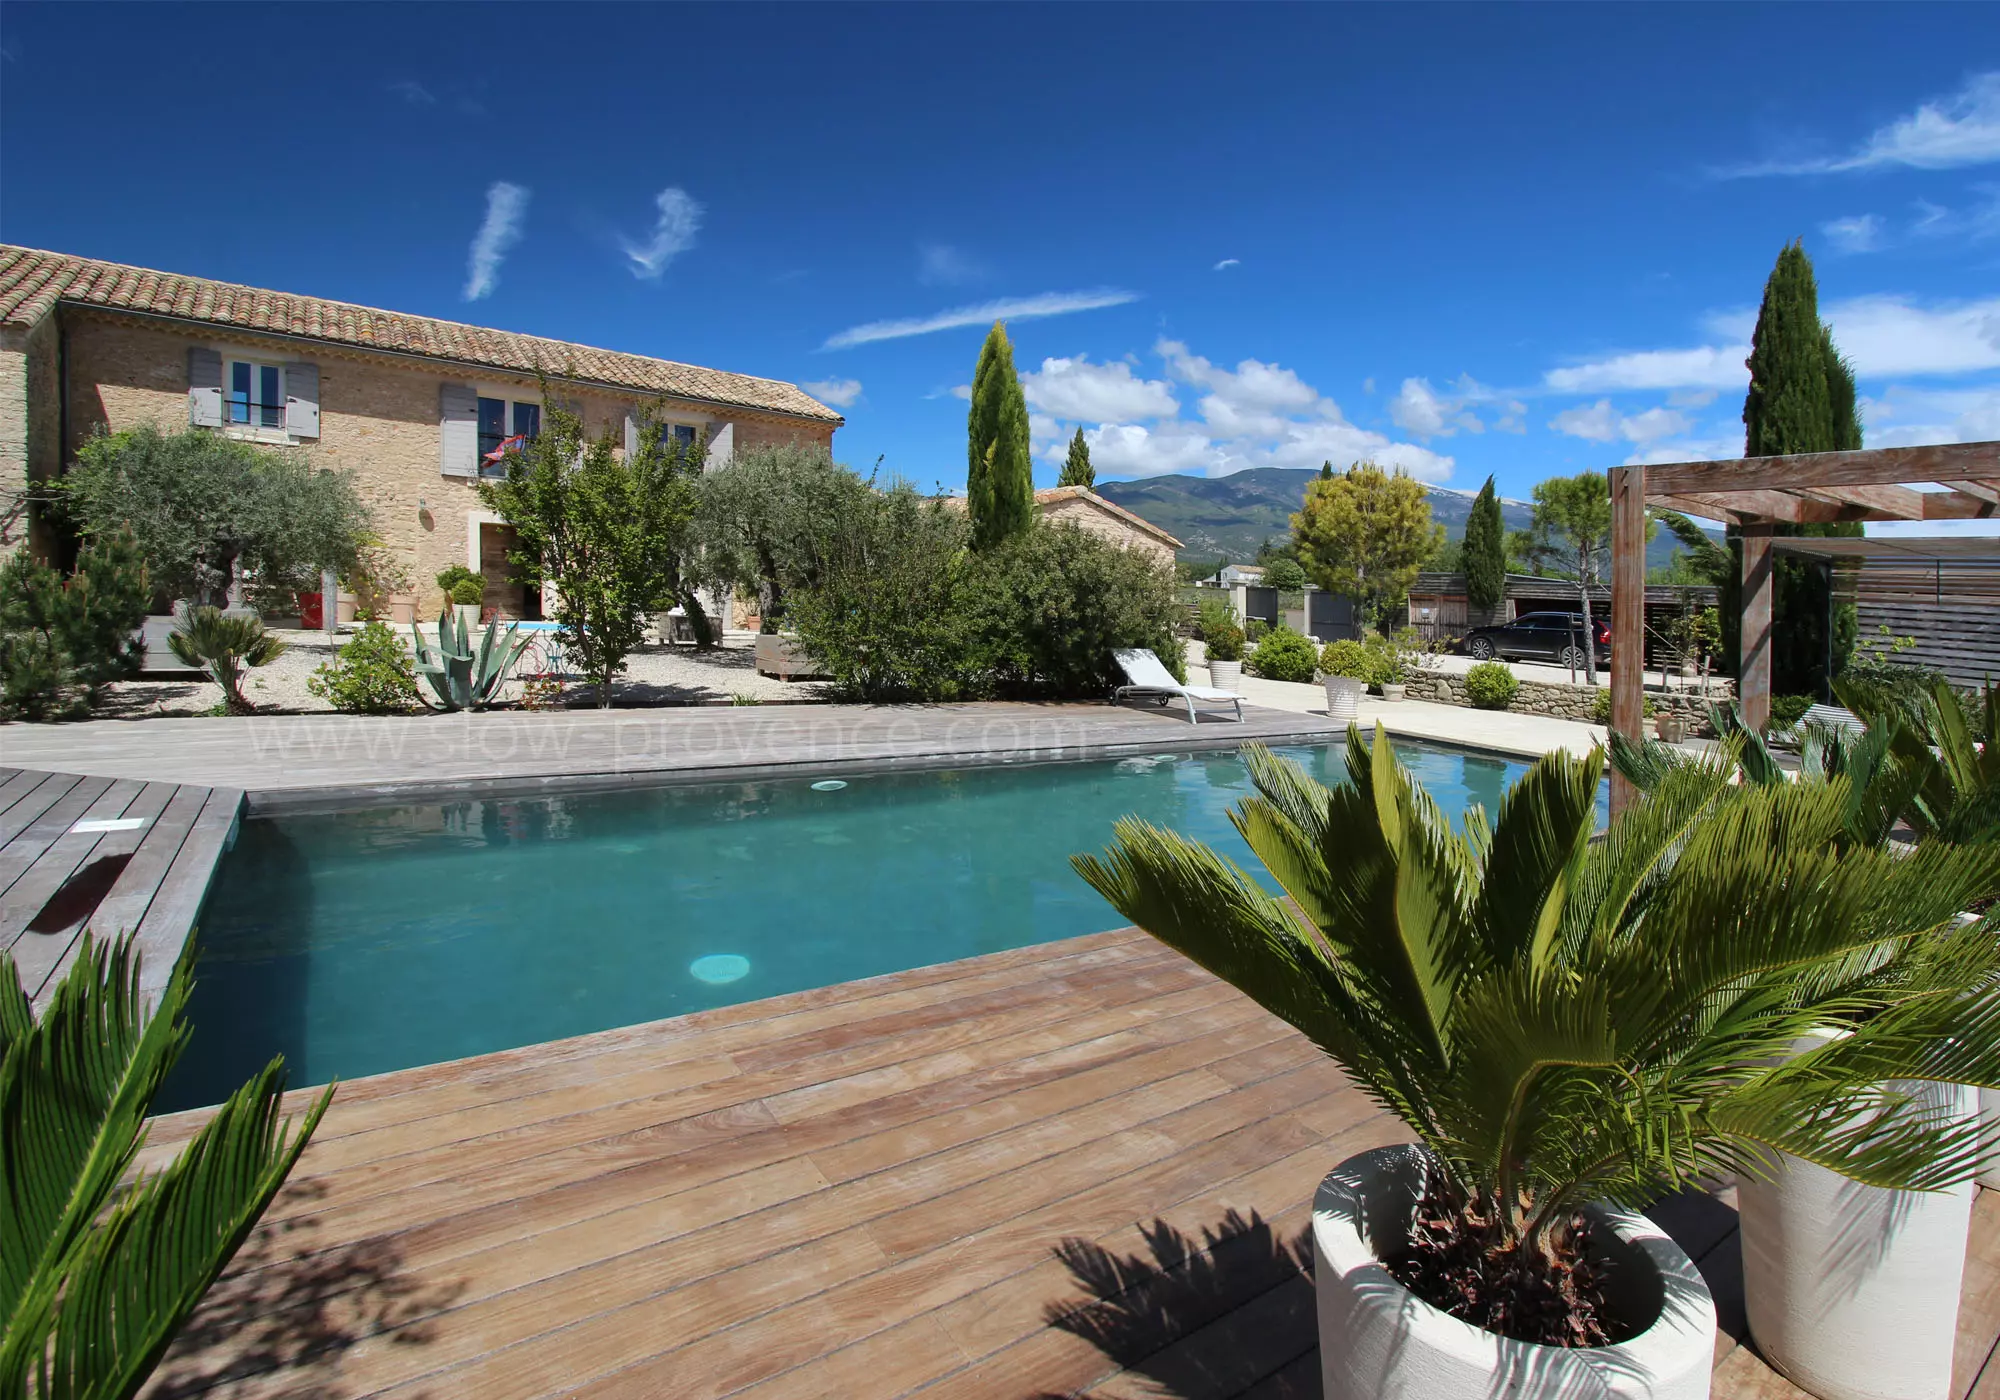 A beautiful Ventoux view from the pool